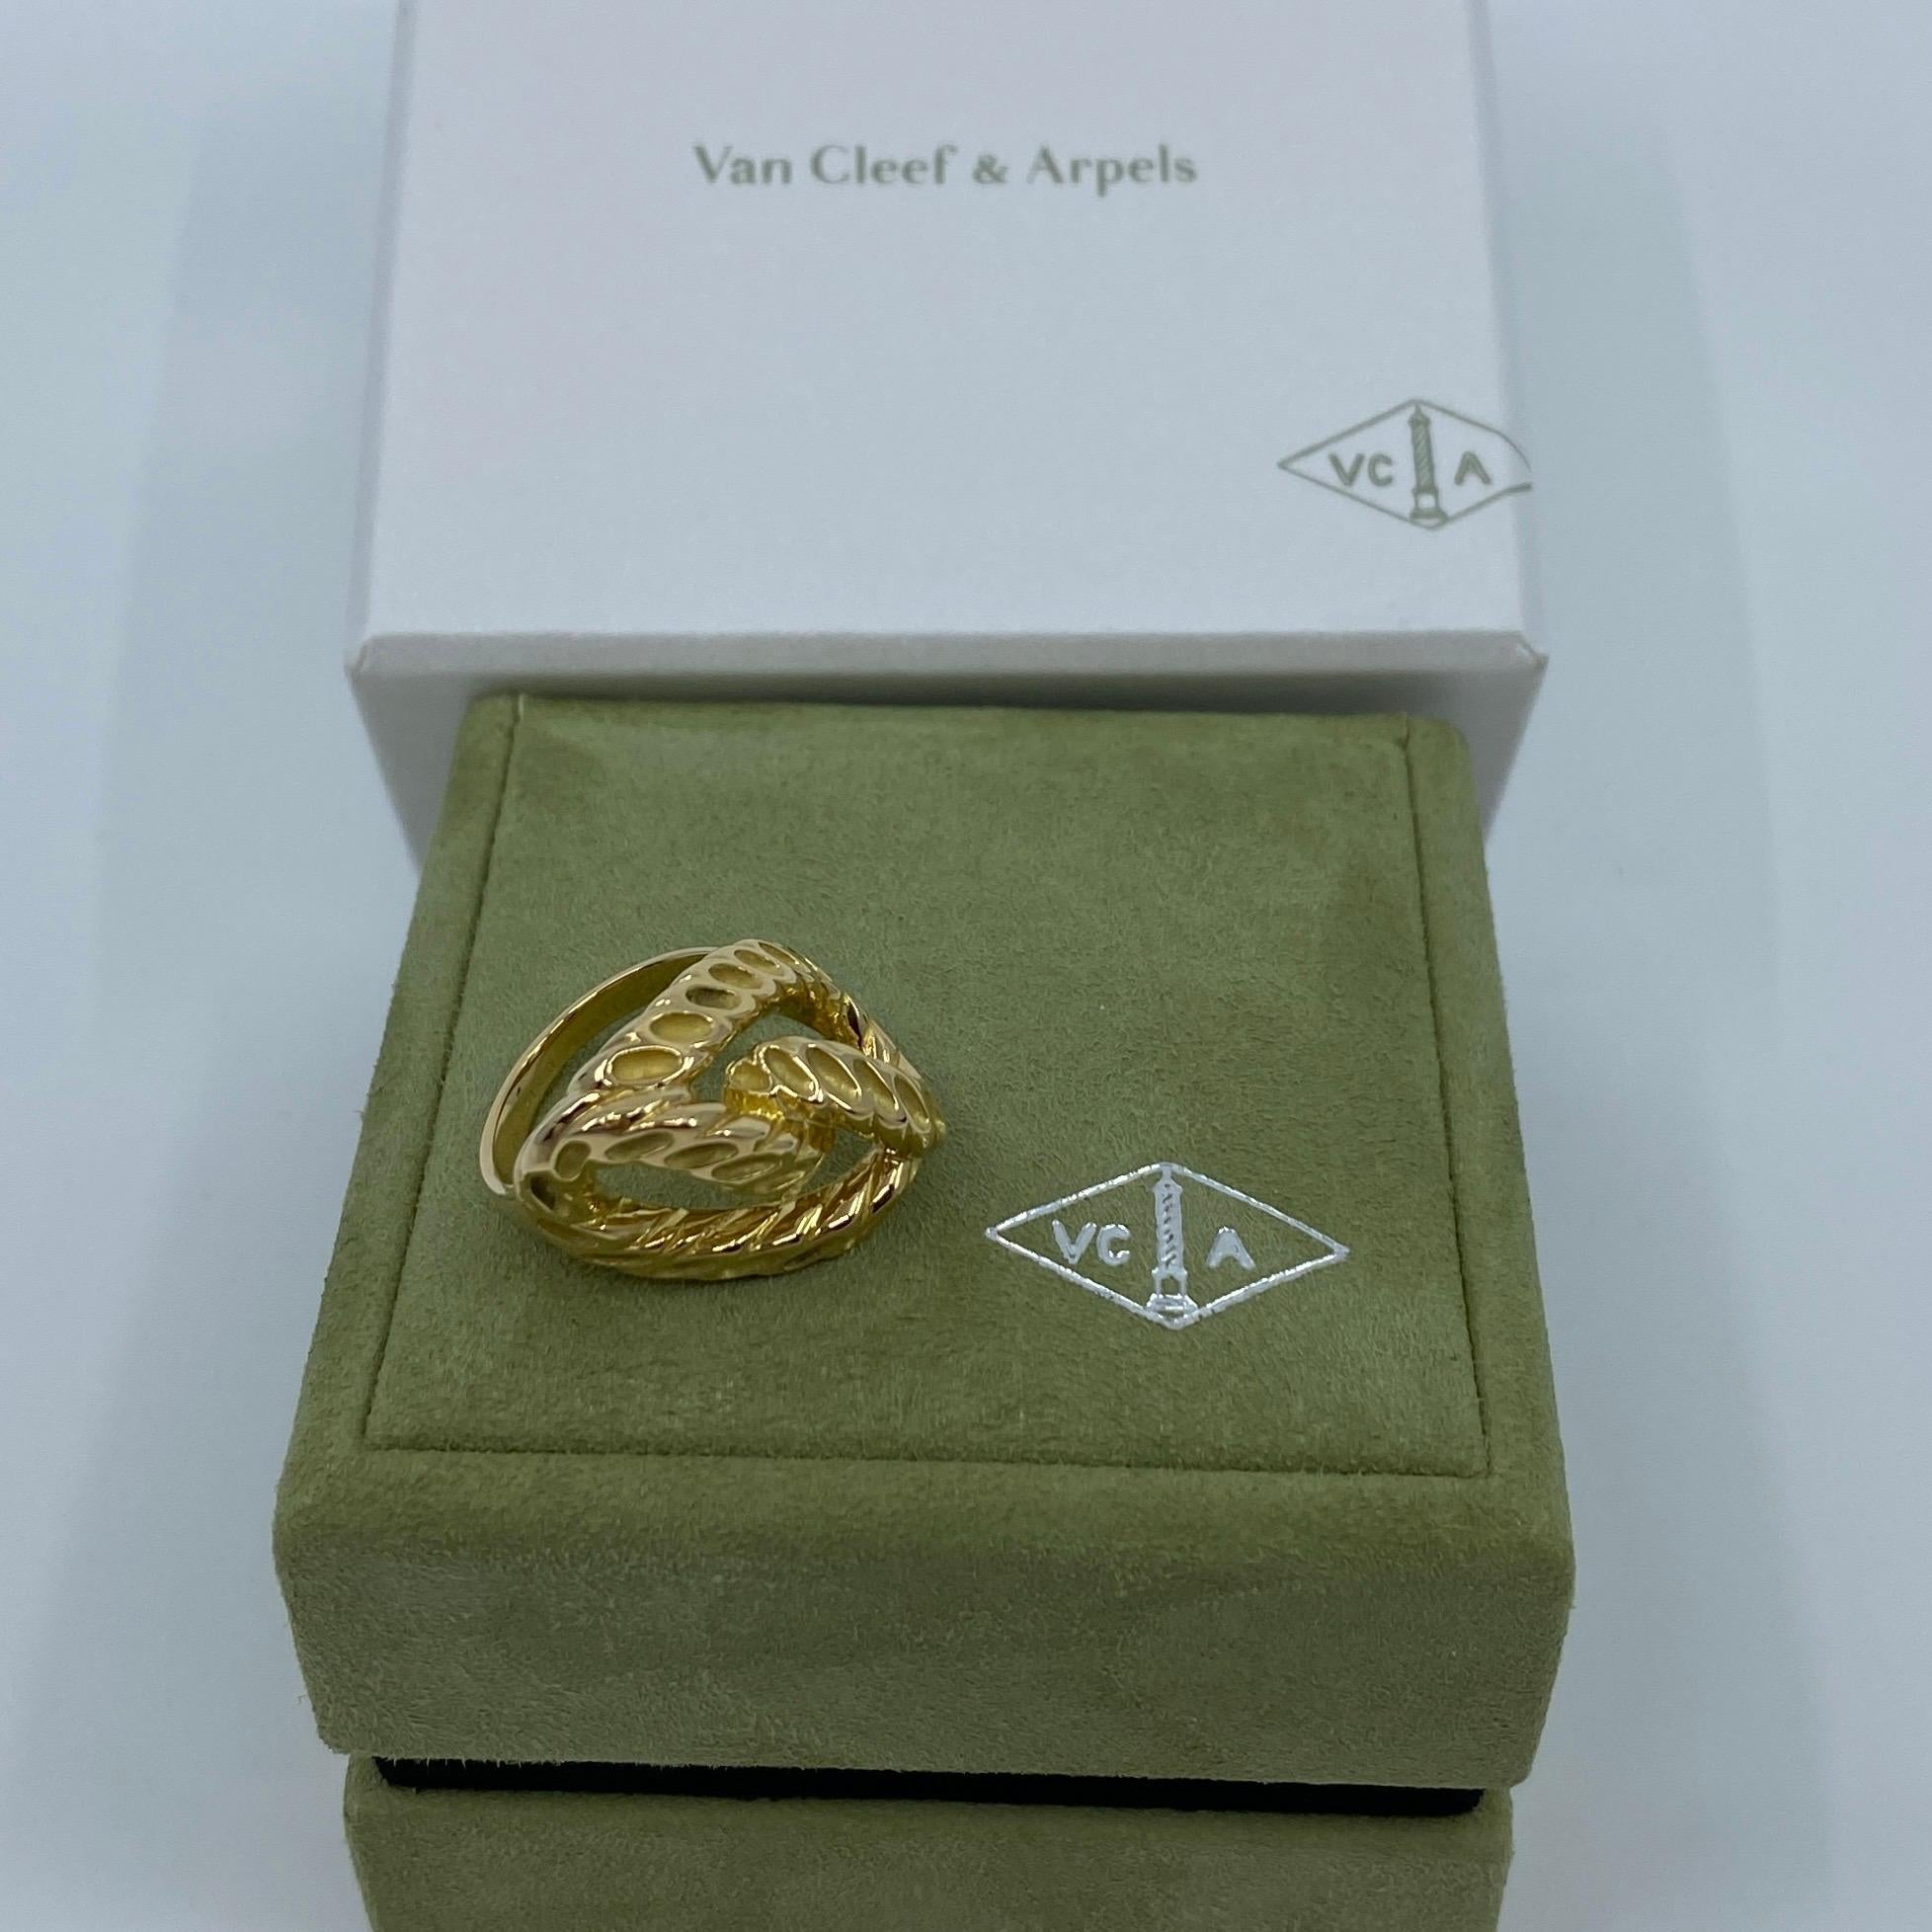 Rare Vintage Van Cleef & Arpels 18k Yellow Gold Braid Rope Motif Ring with Box For Sale 4